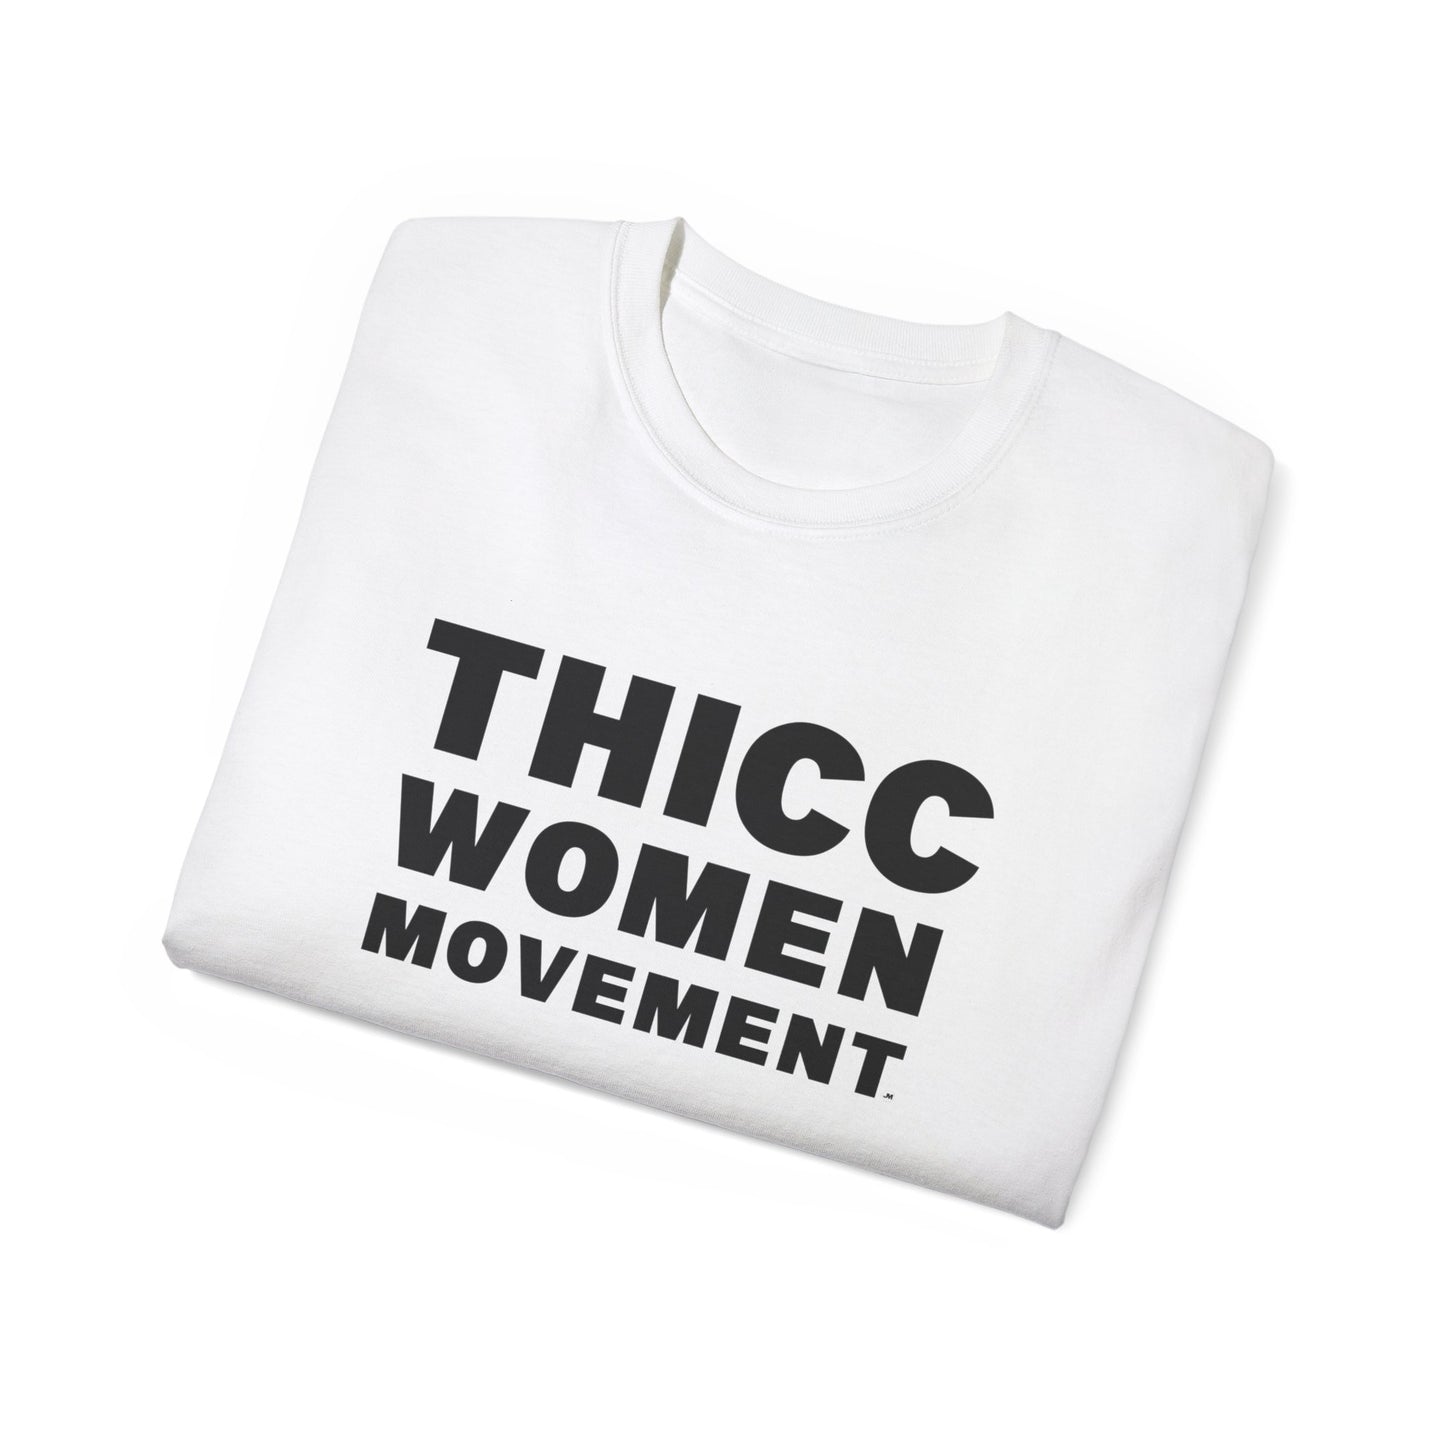 THICC Women Movement Tee